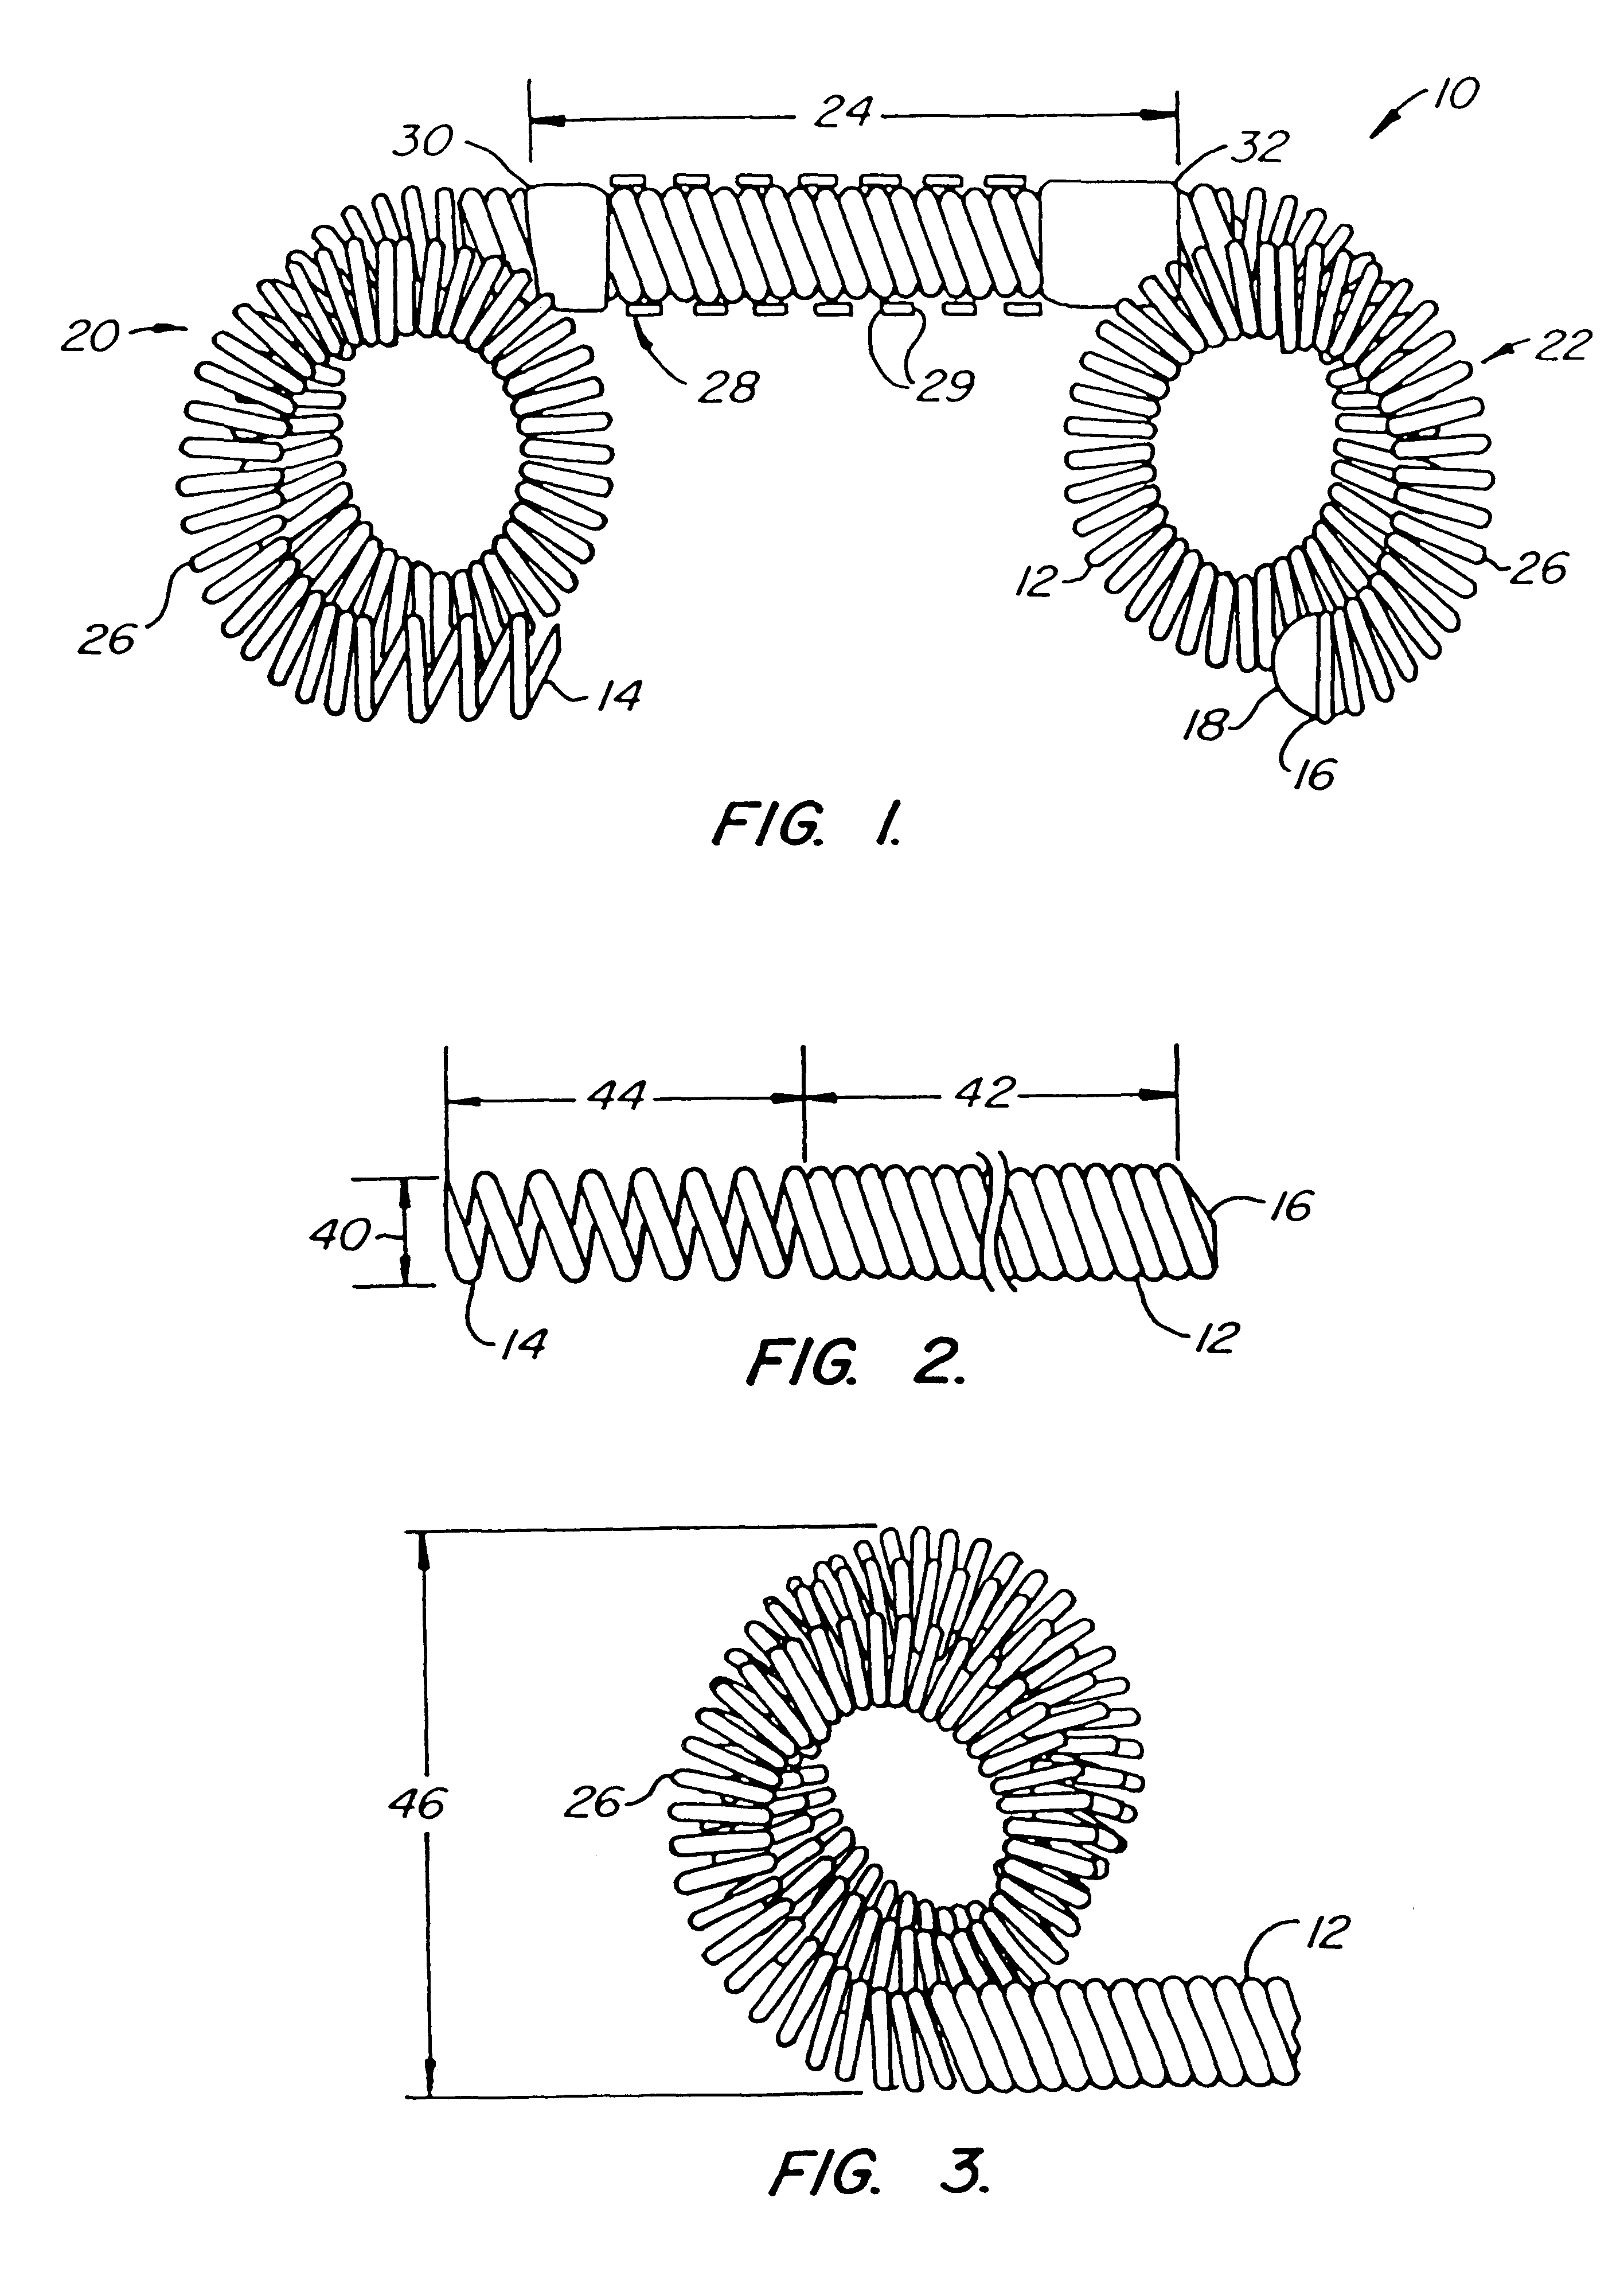 Contraceptive transcervical fallopian tube occlusion devices and methods